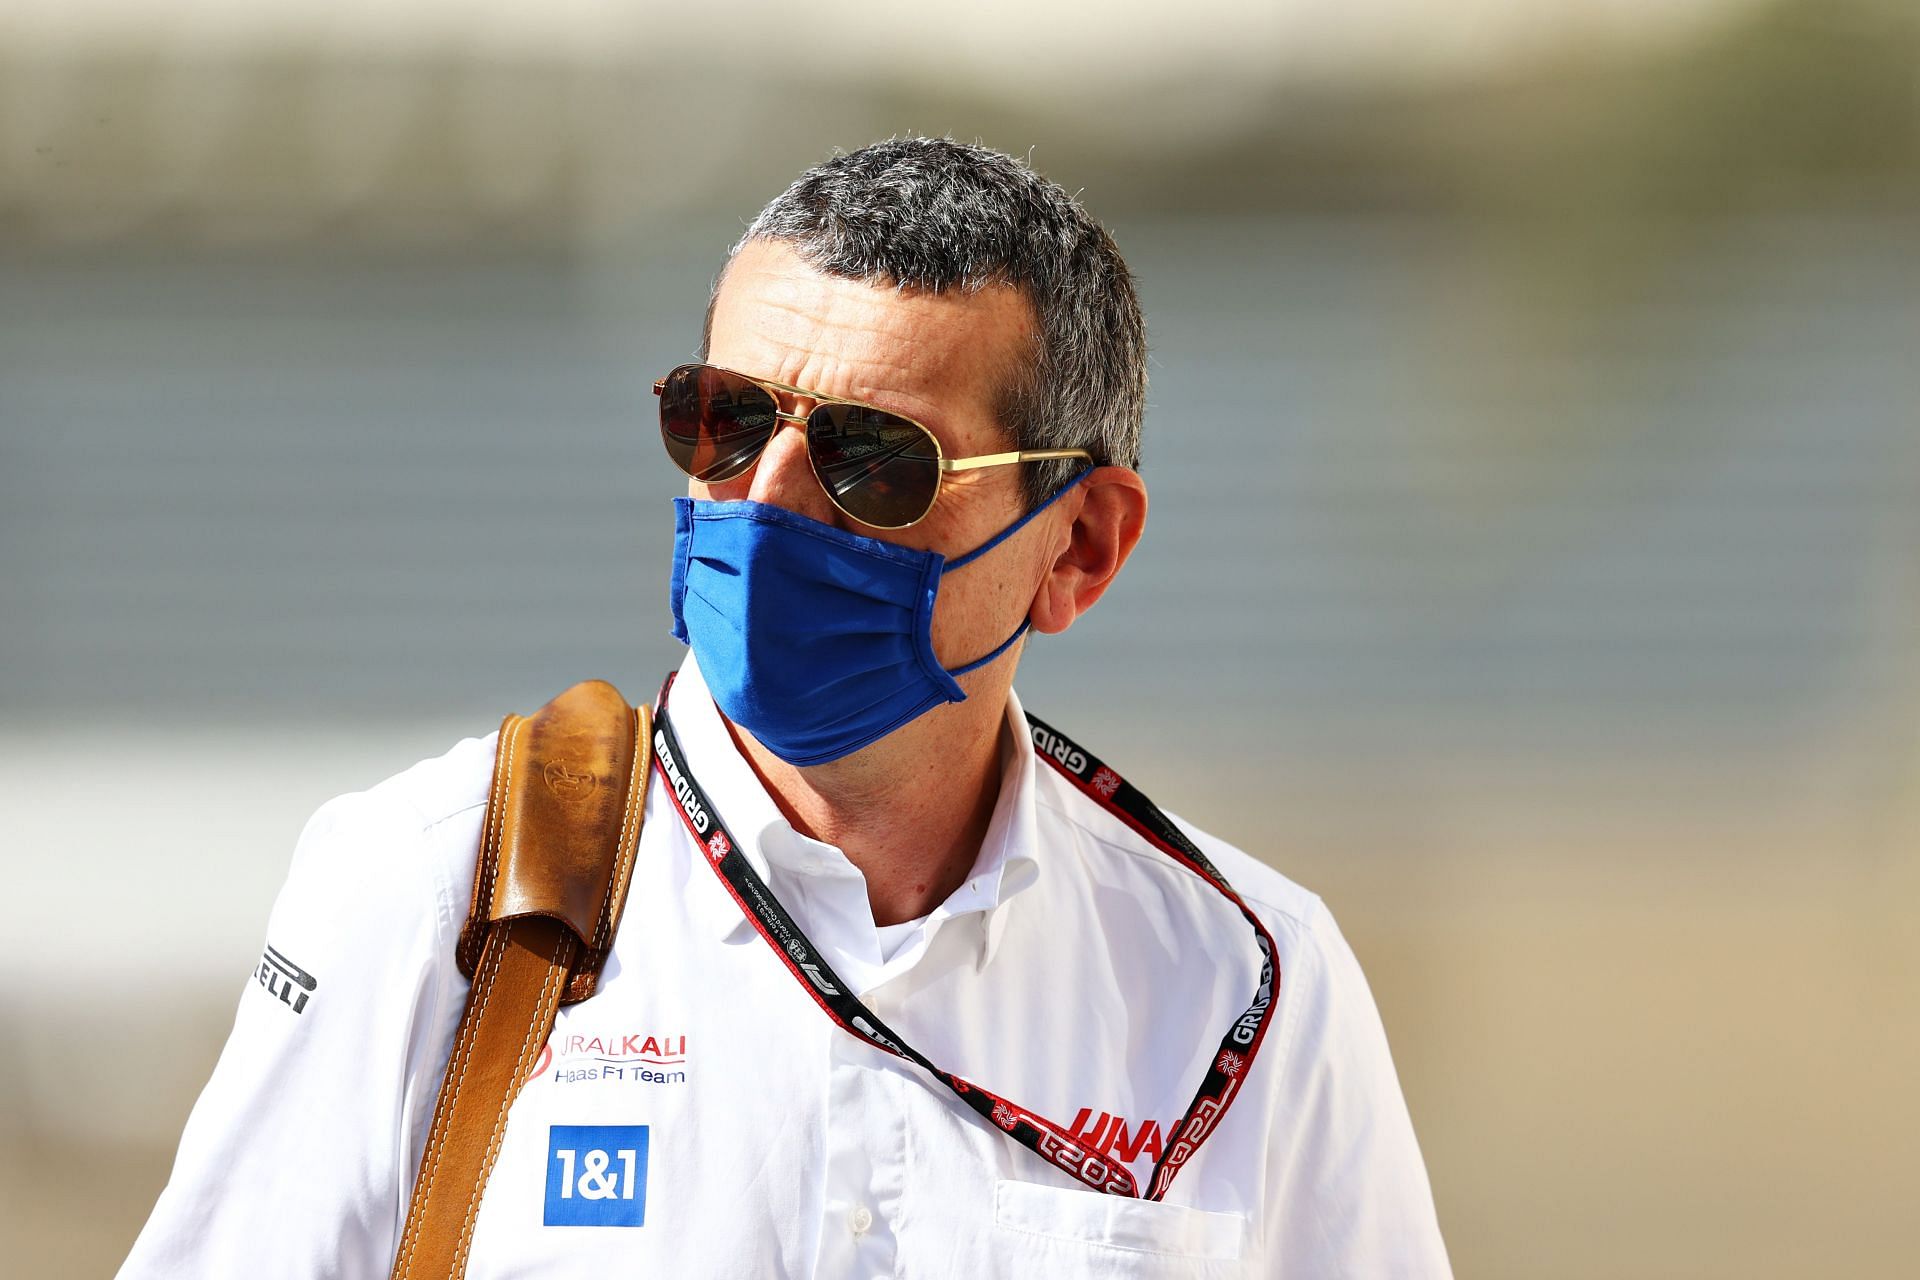 F1 Grand Prix of Abu Dhabi - Guenther Steiner arrives at the paddock